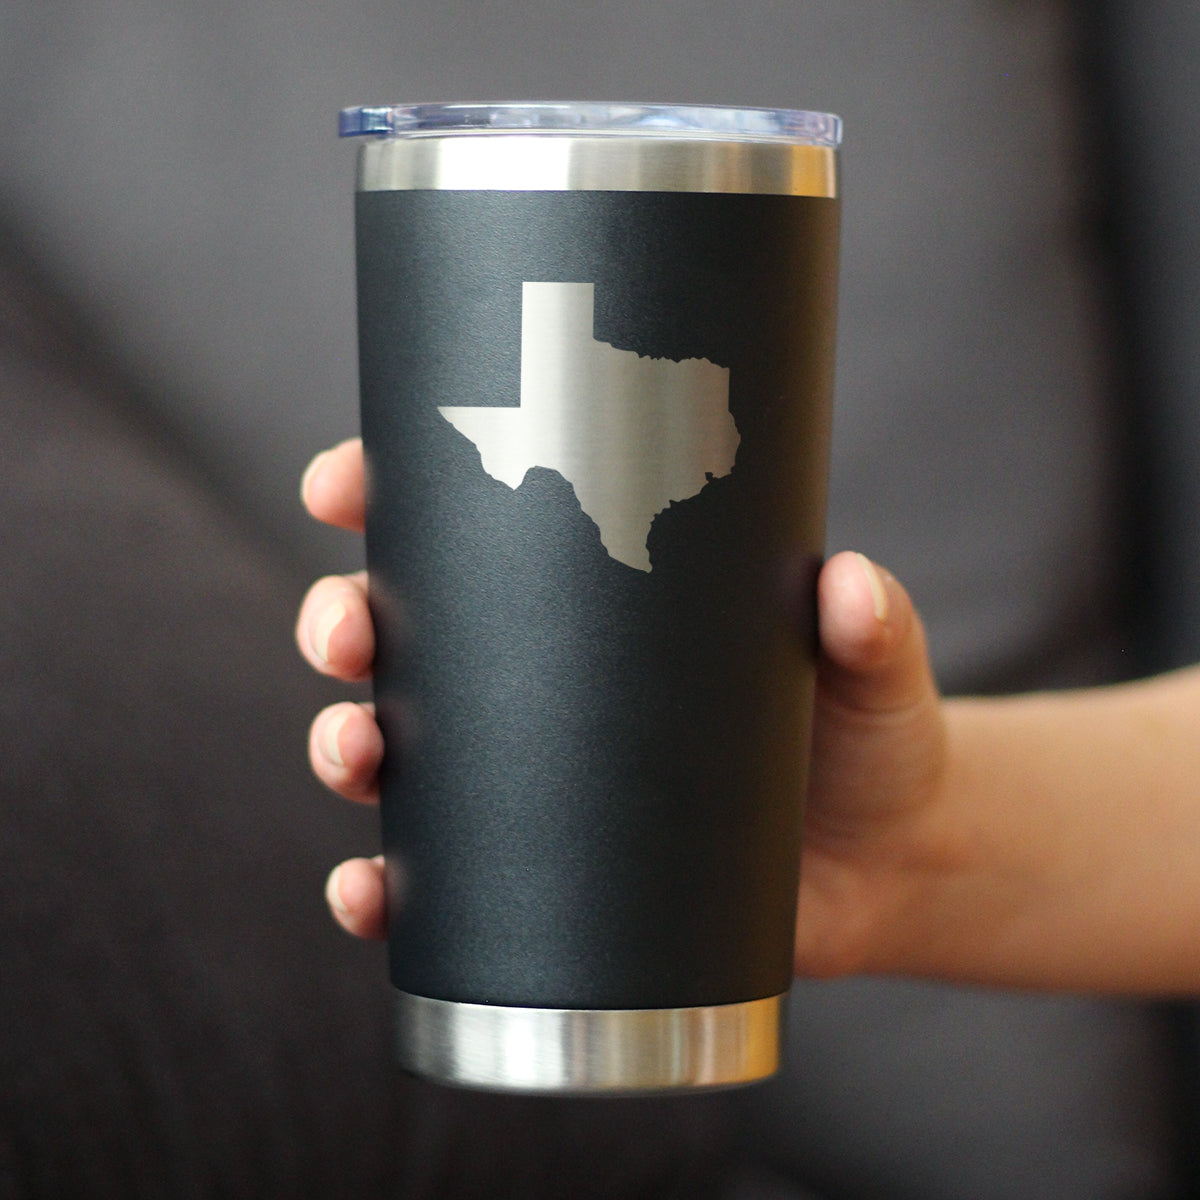 Texas State Outline - Insulated Coffee Tumbler Cup with Sliding Lid - Stainless Steel Insulated Mug - State Themed Decor and Gifts for Texan Women &amp; Men